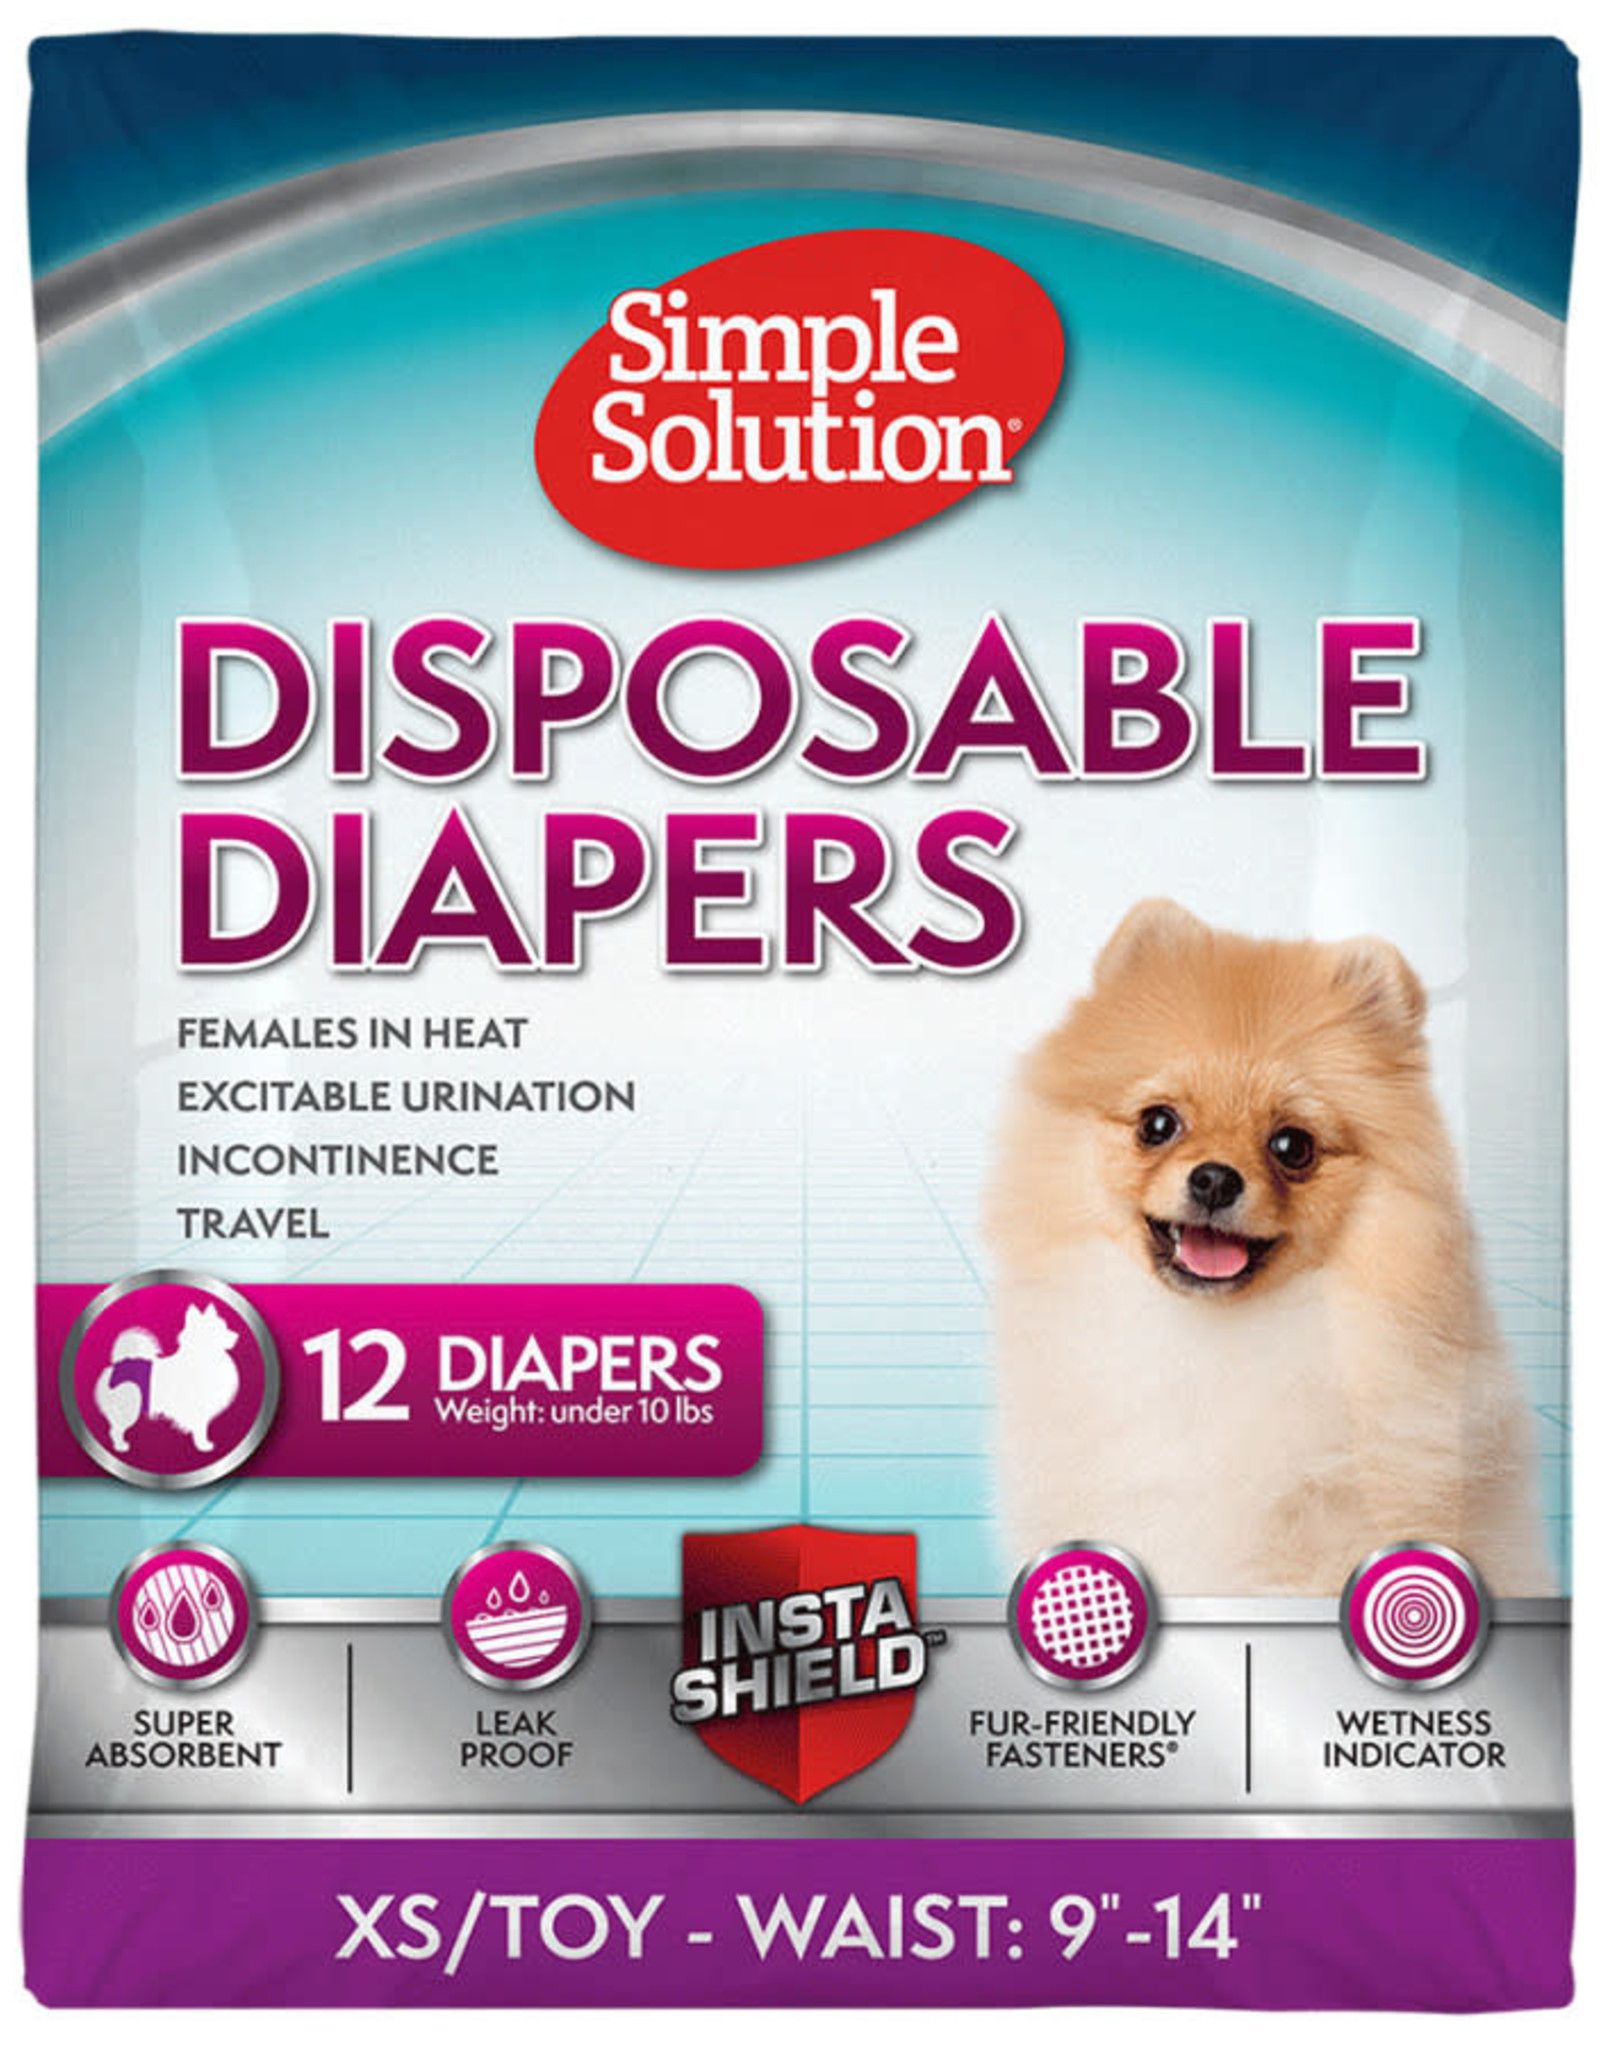 SIMPLE SOLUTION Disposable Diapers White, XS, 12 pk